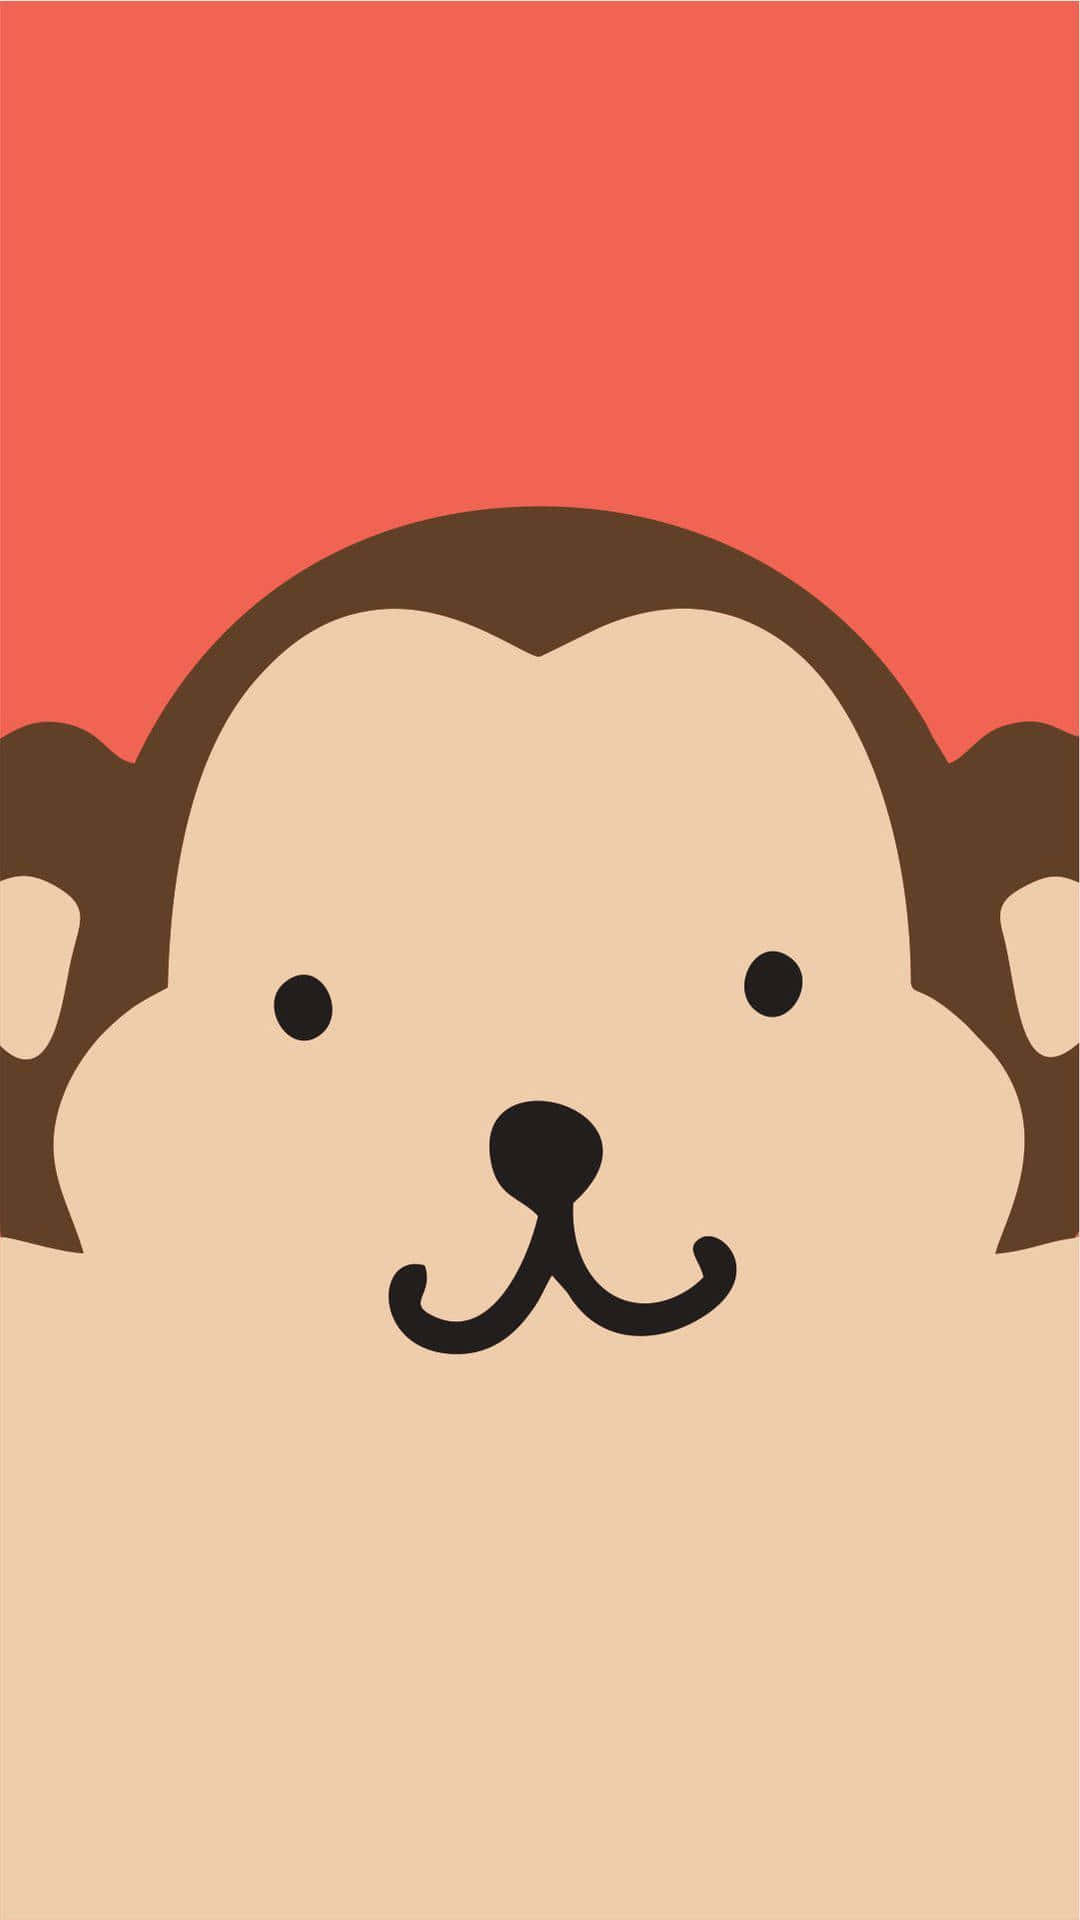 Check out this adorable monkey with an iPhone! Wallpaper